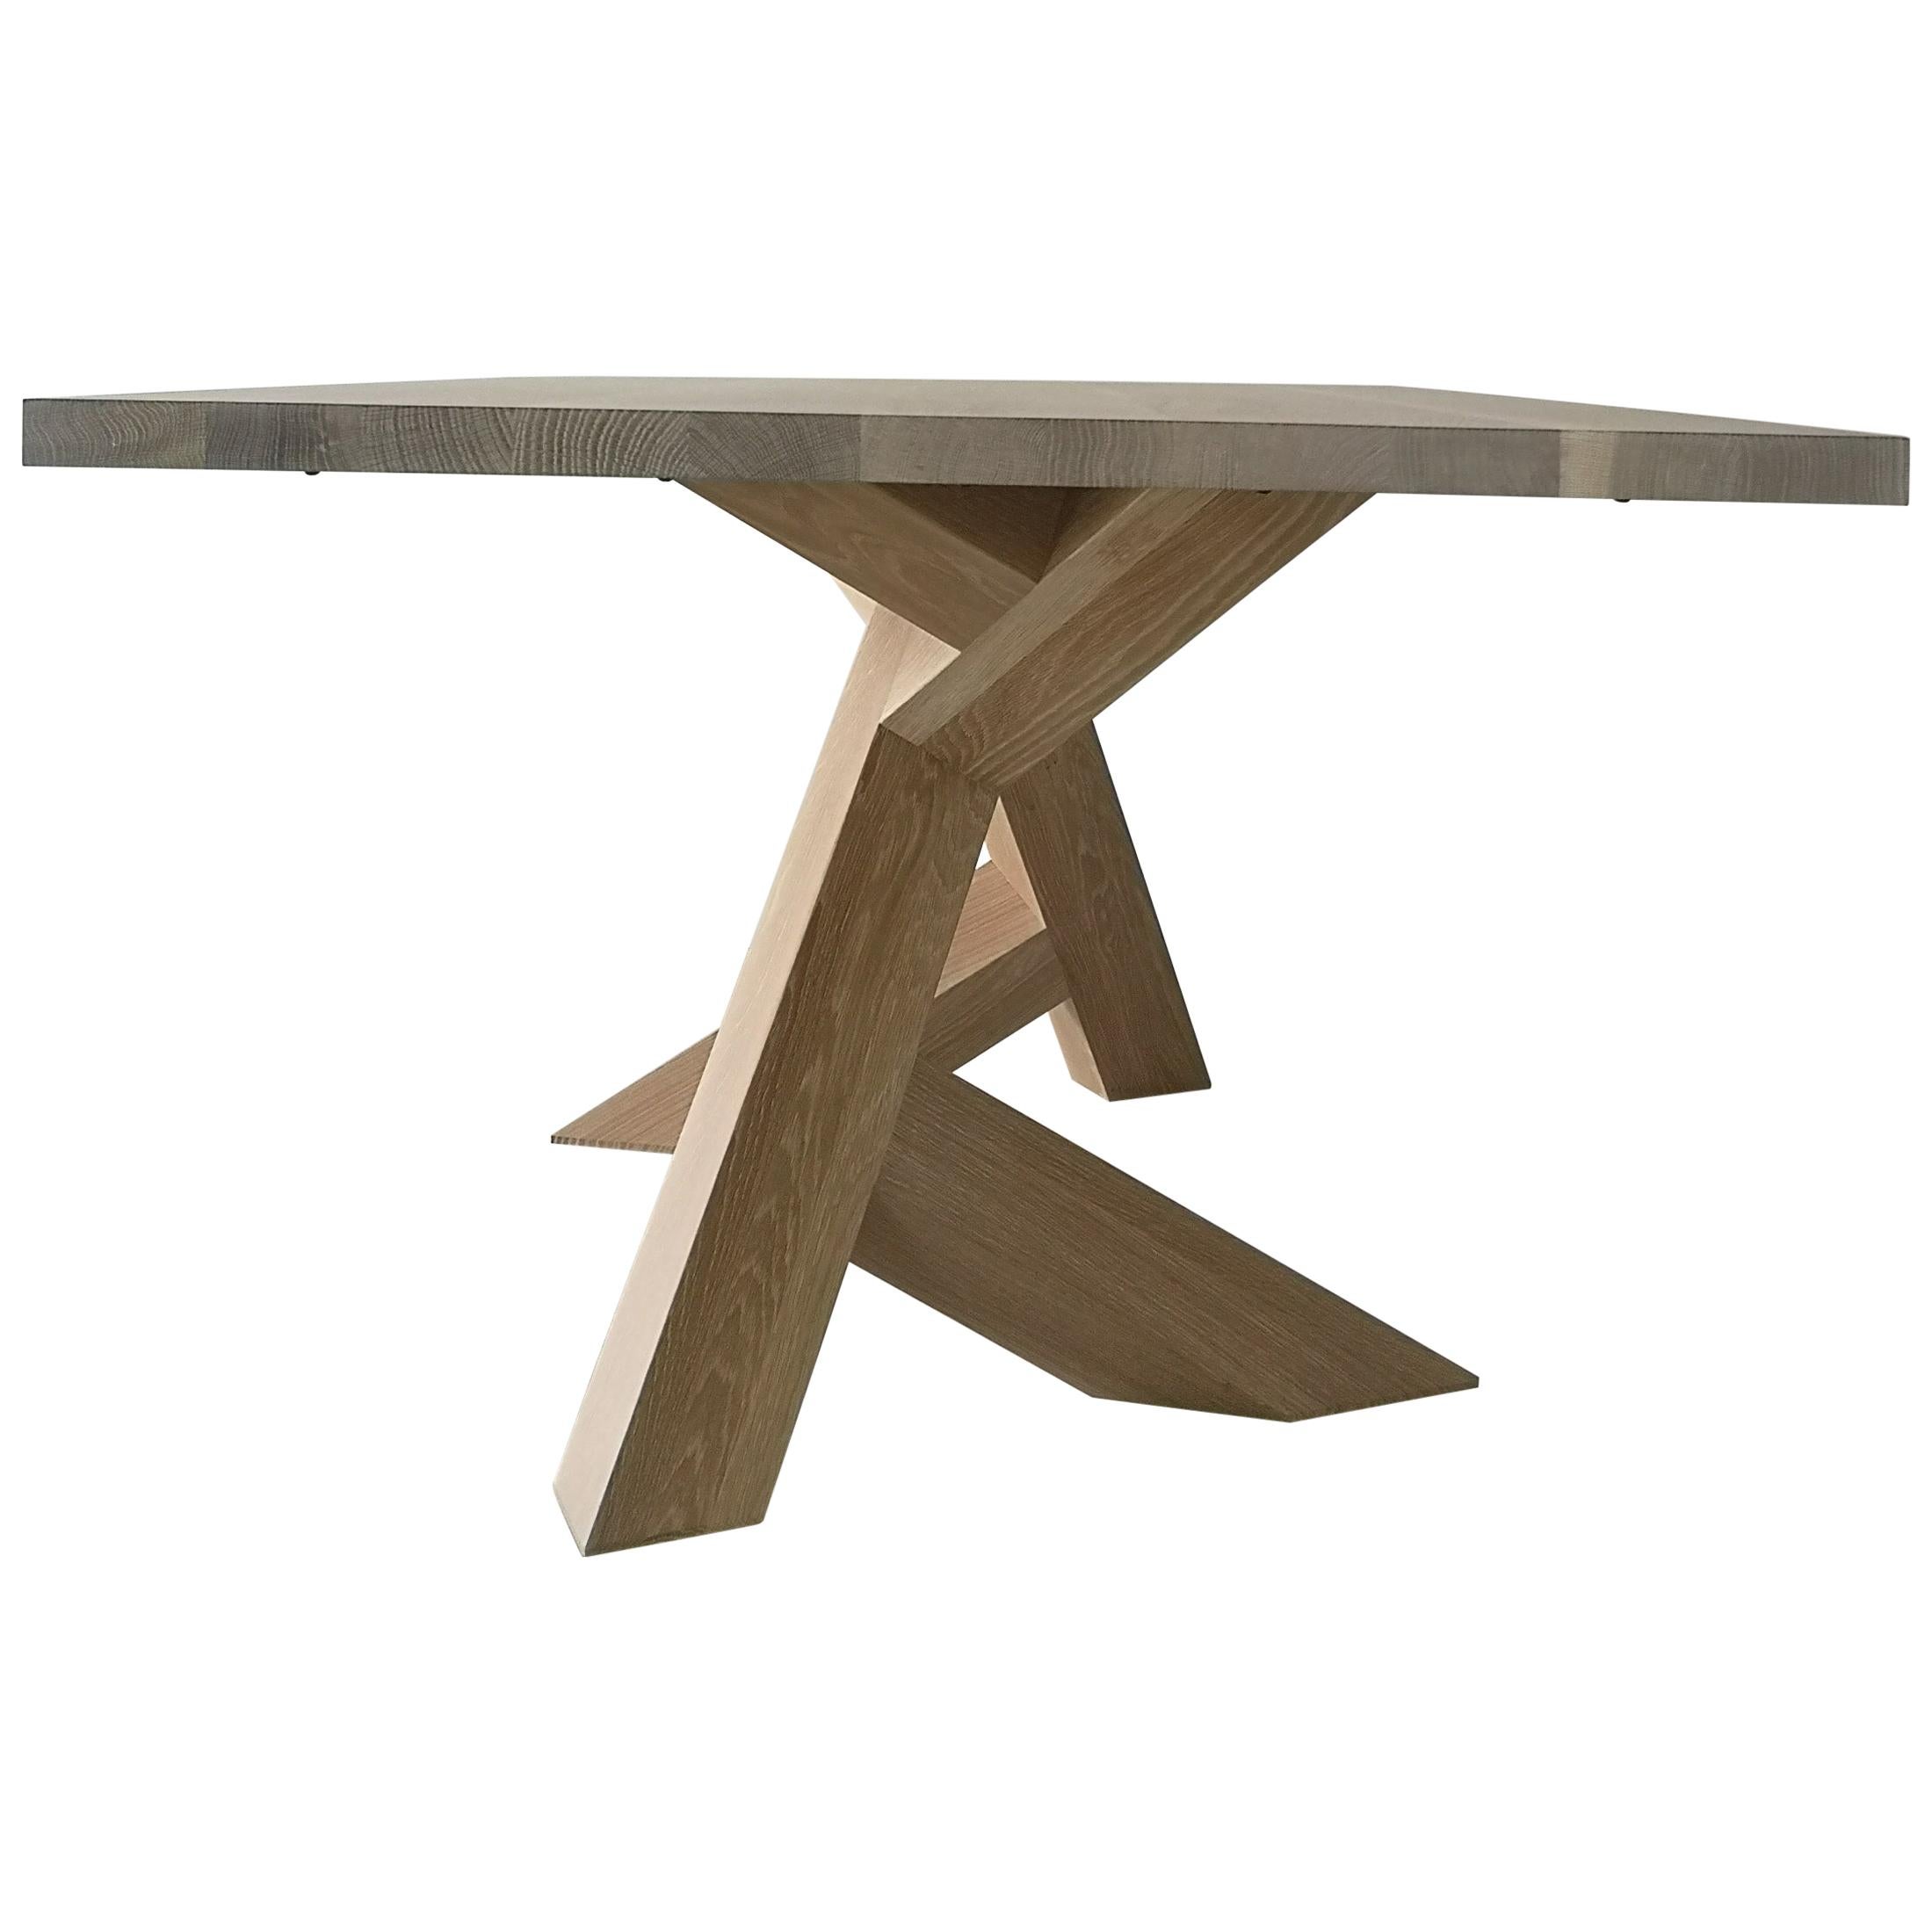 Iconoclast Modern Hardwood Dining Table by Izm Design For Sale